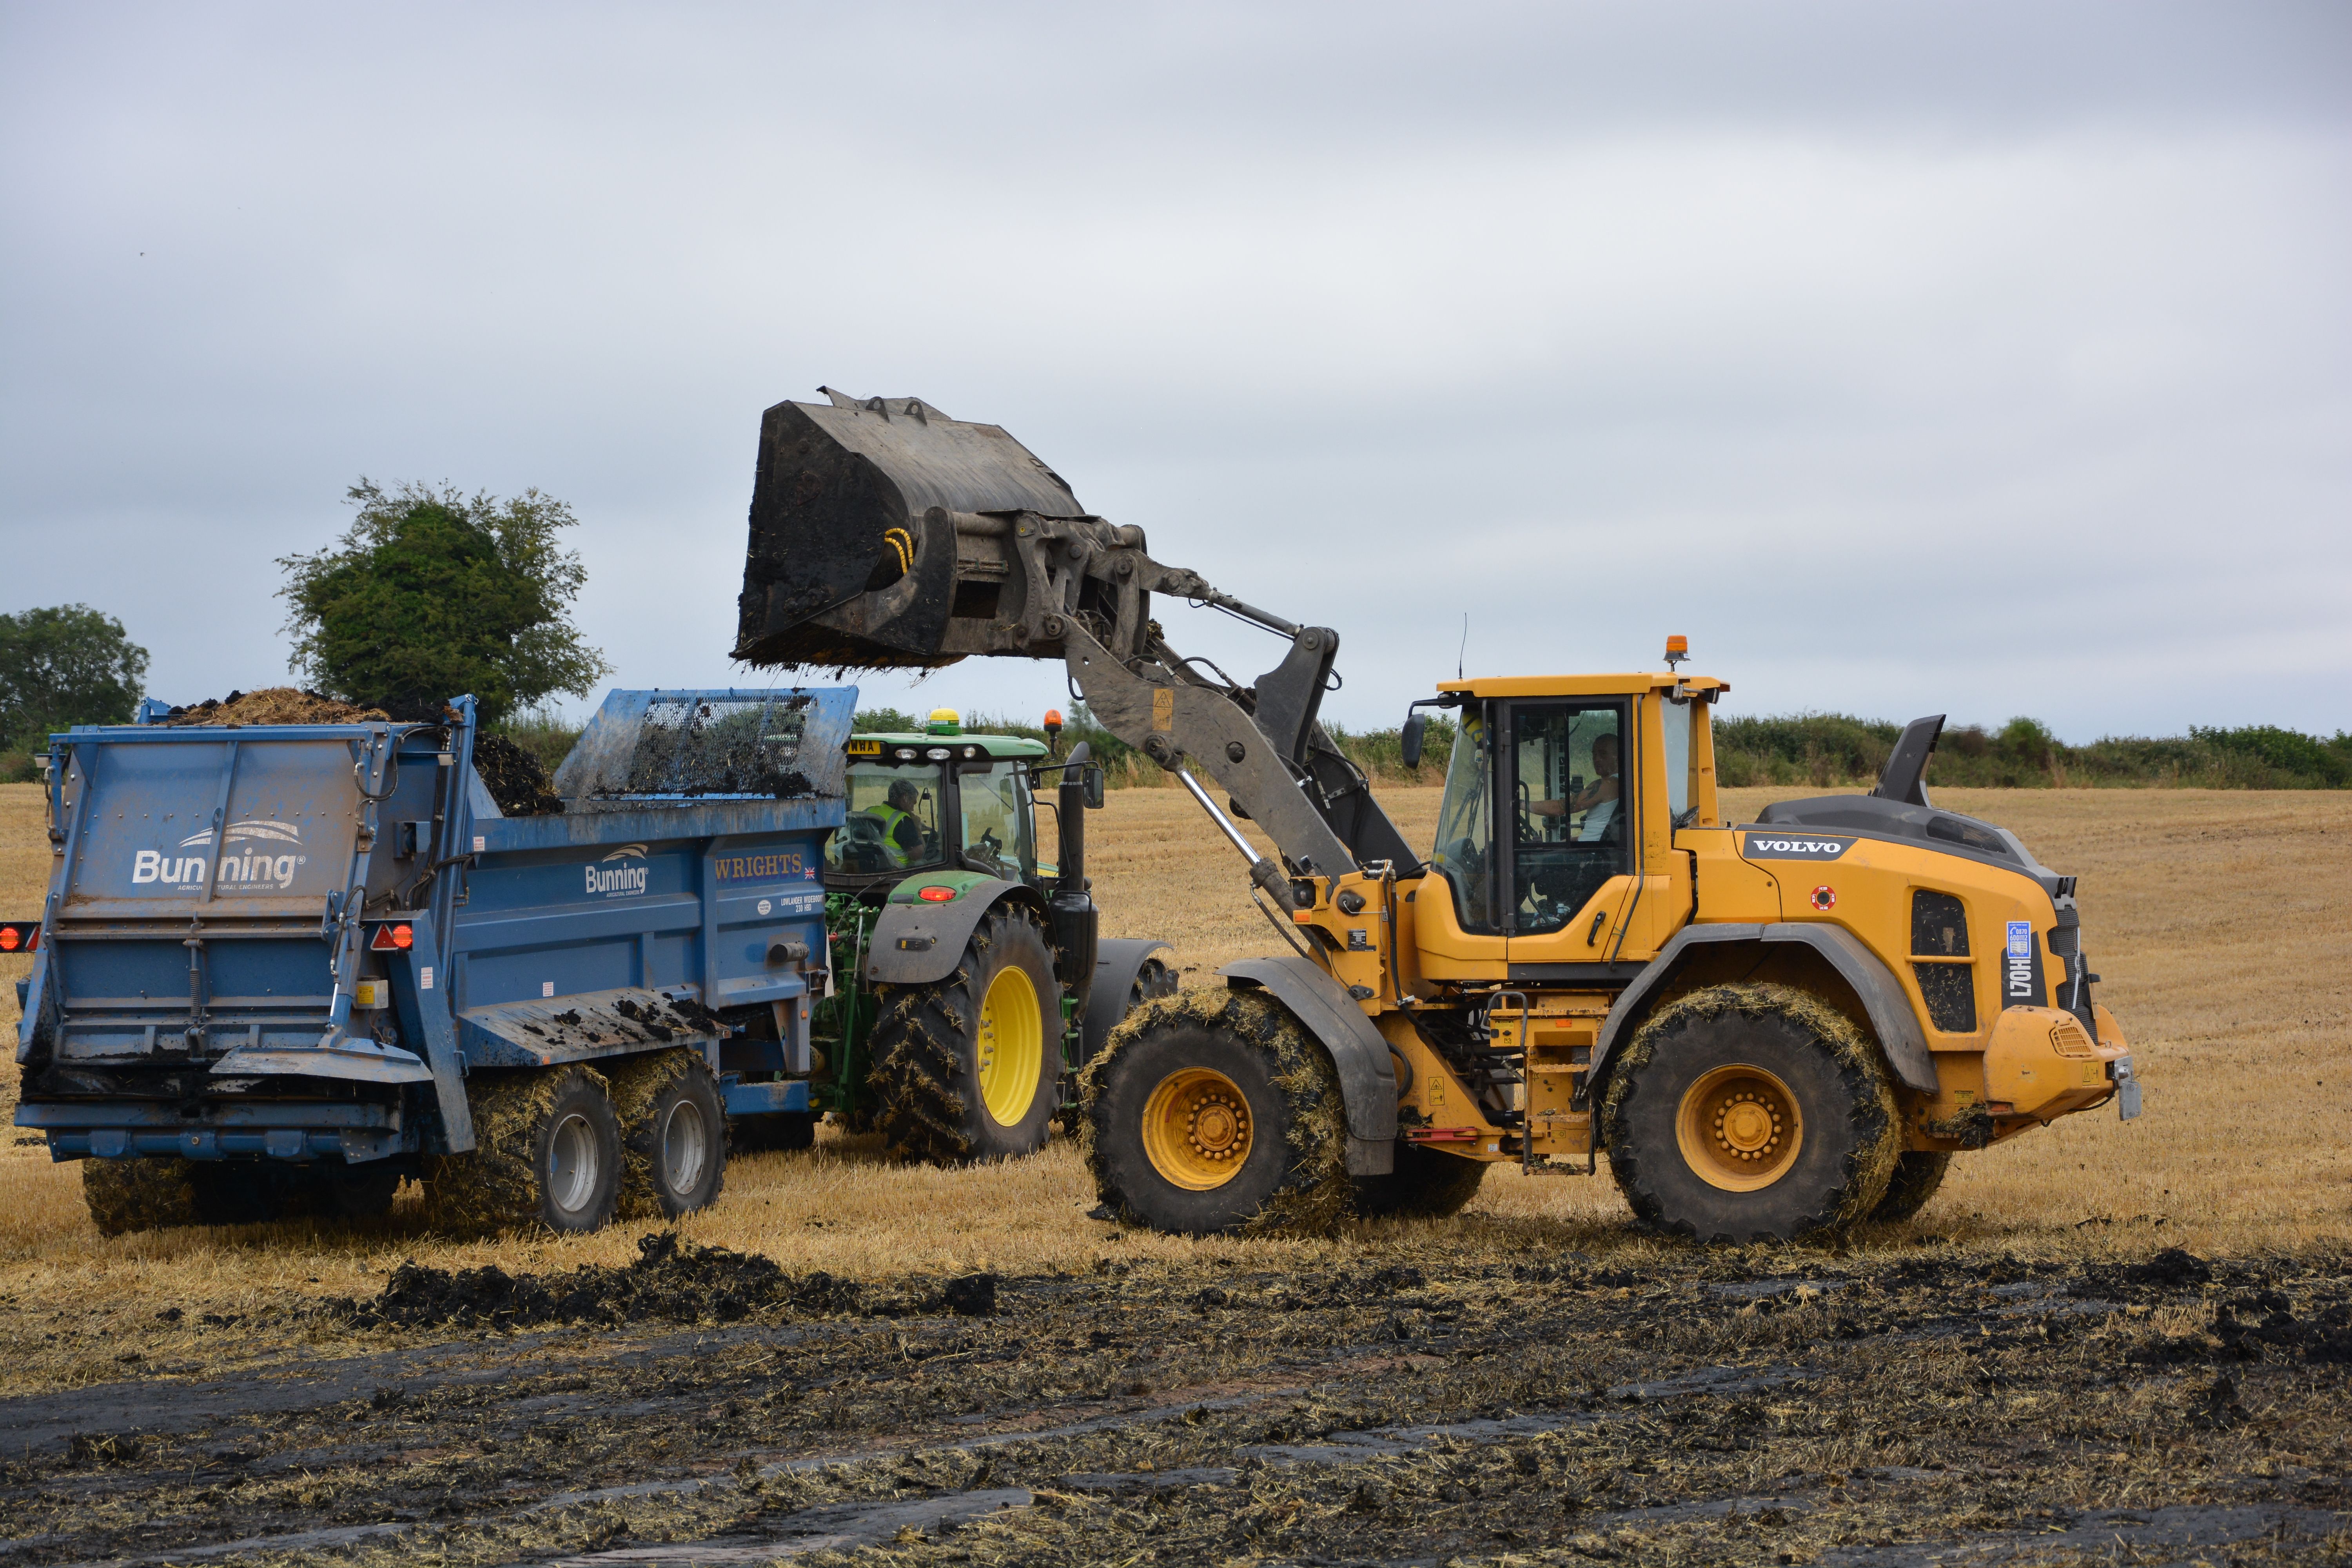 Severn Trent Biosolids - A Partnership You Can Trust